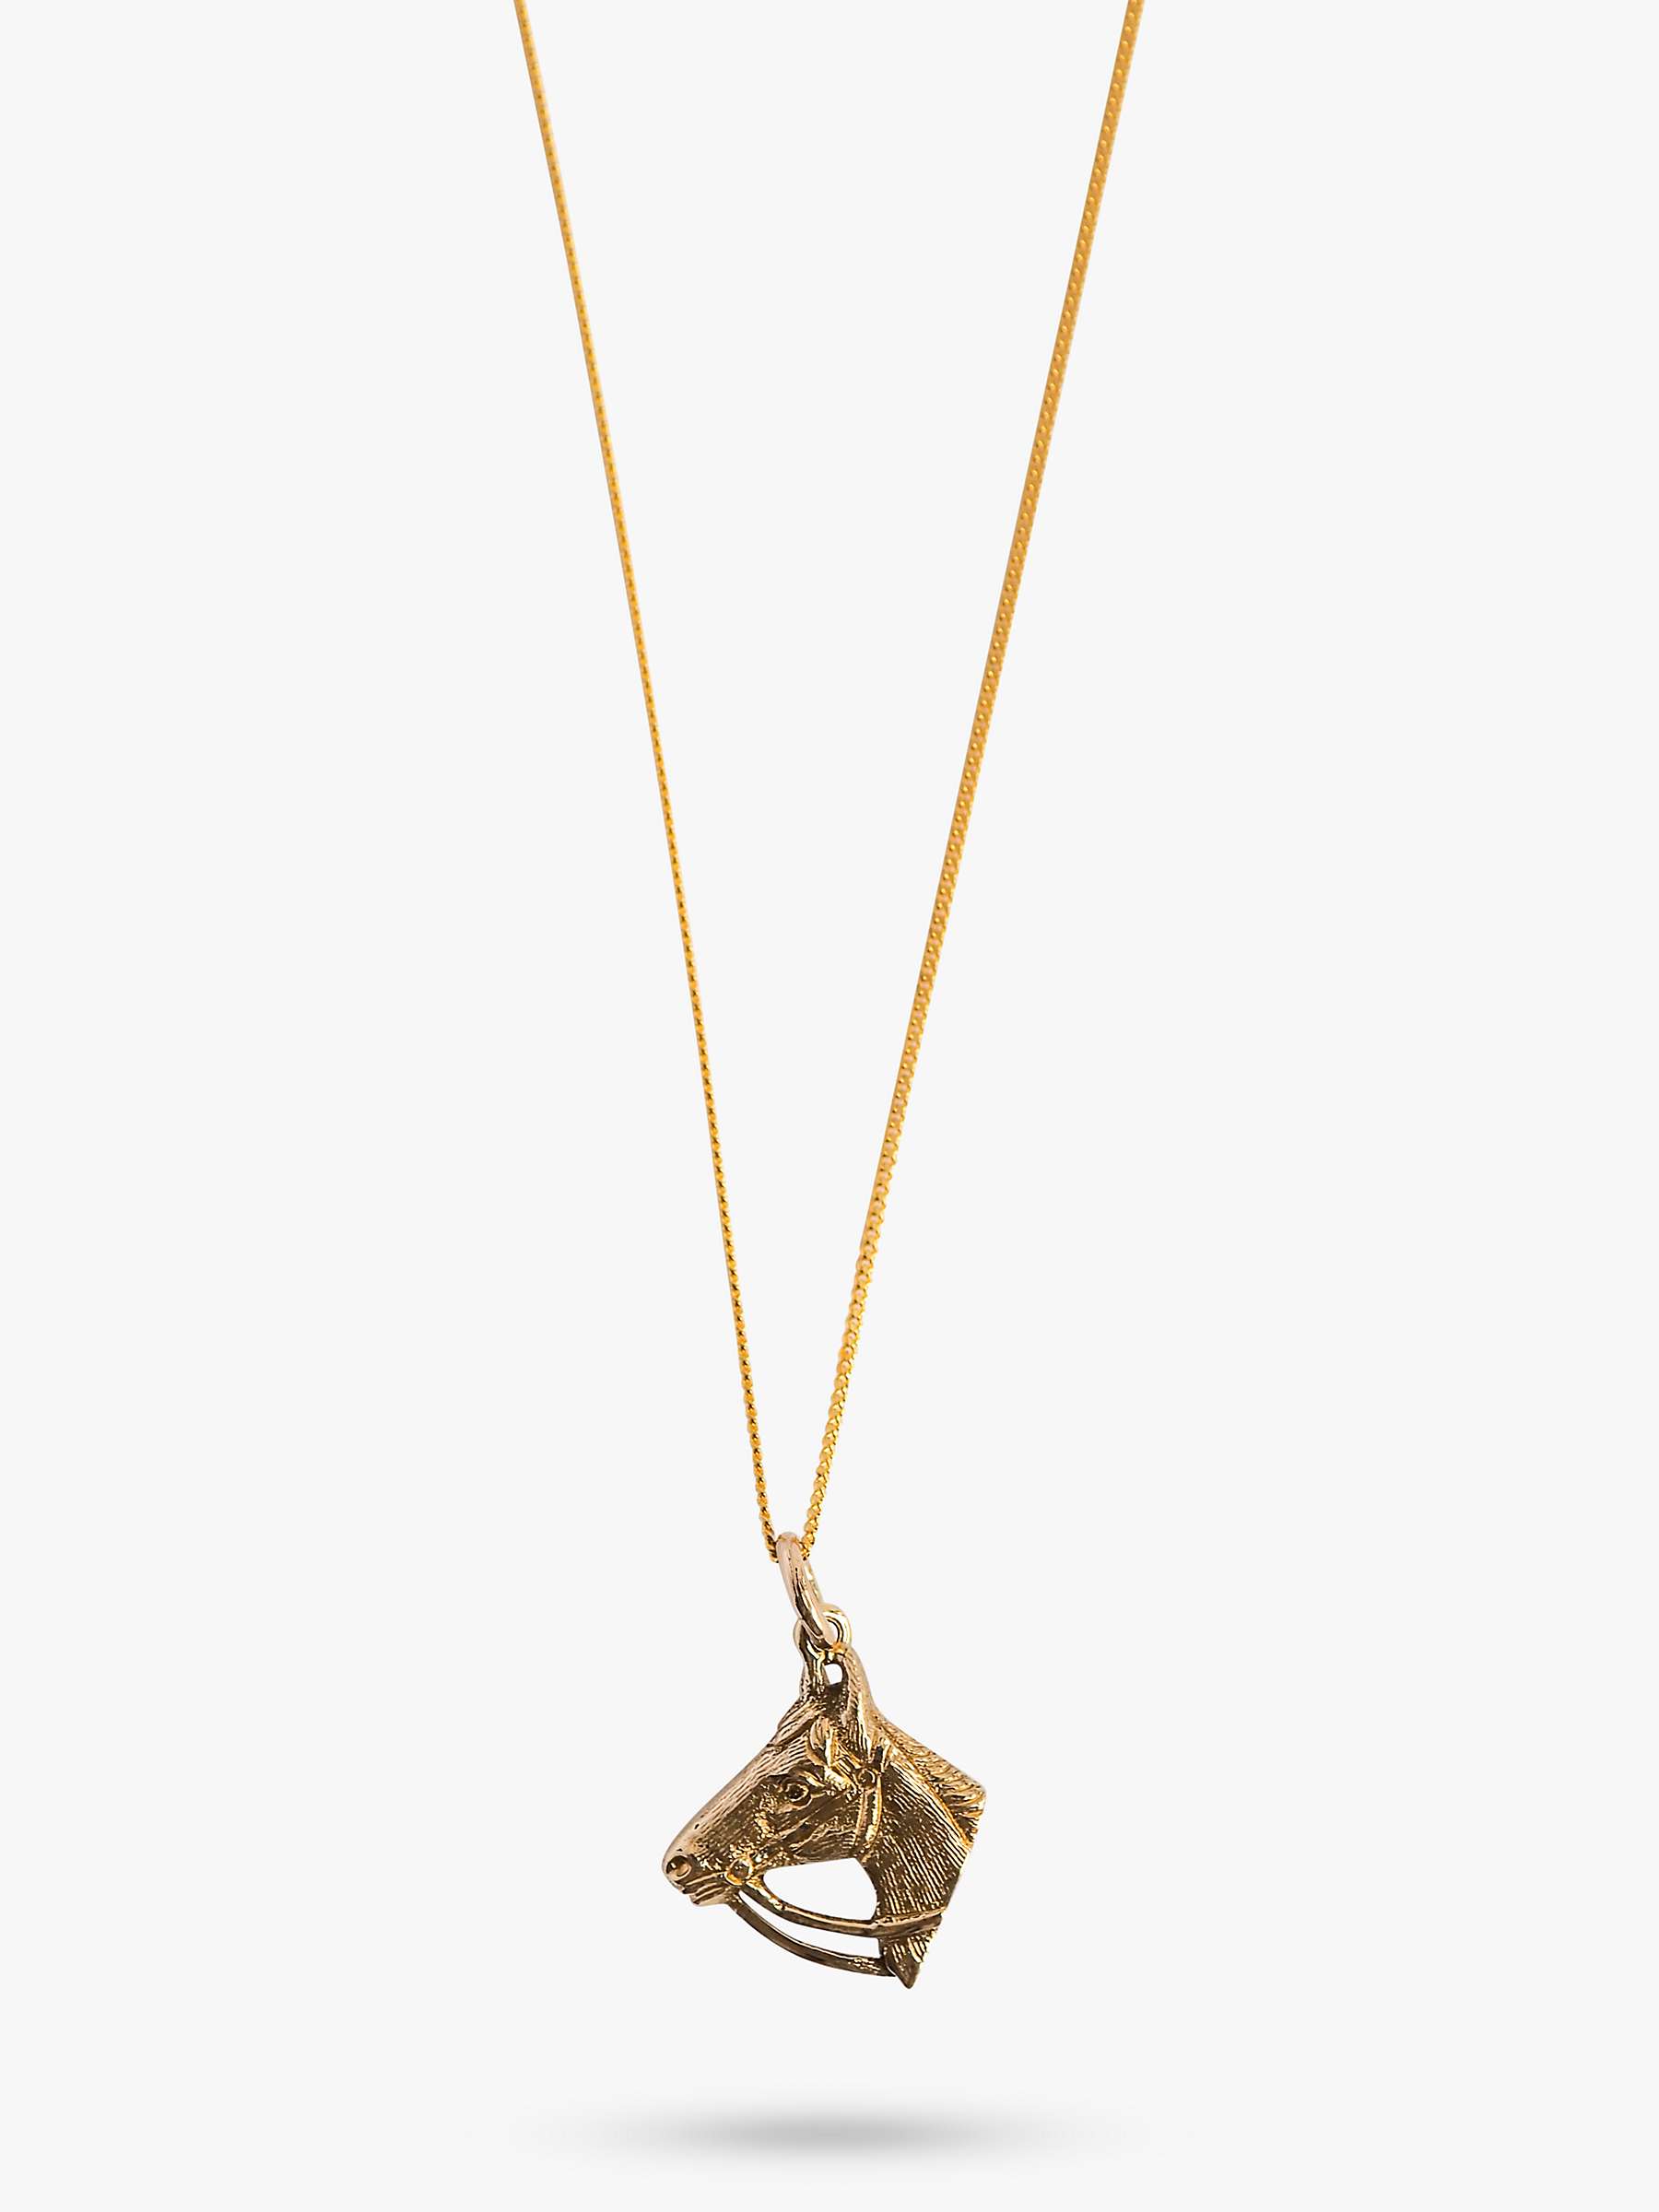 Buy L & T Heirlooms Second Hand 9ct Yellow Gold Horse Pendant Necklace, Dated Circa 1951 Online at johnlewis.com